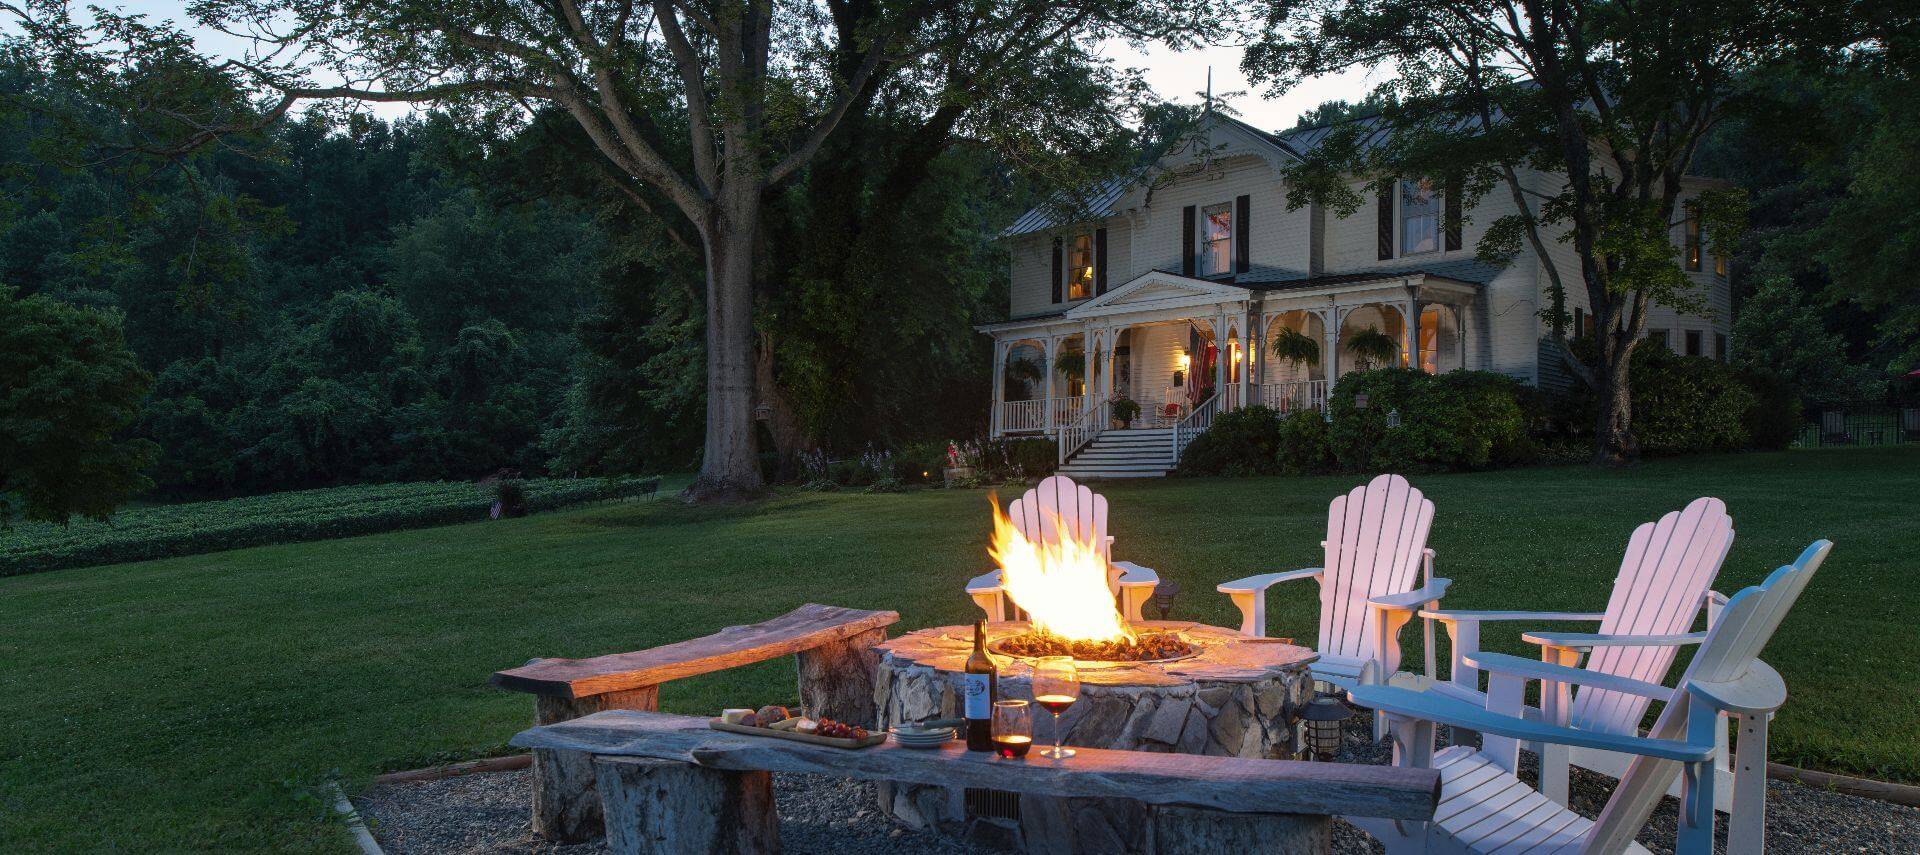 Orchard House Bed And Breakfast Lodging Near Charlottesville Virginia